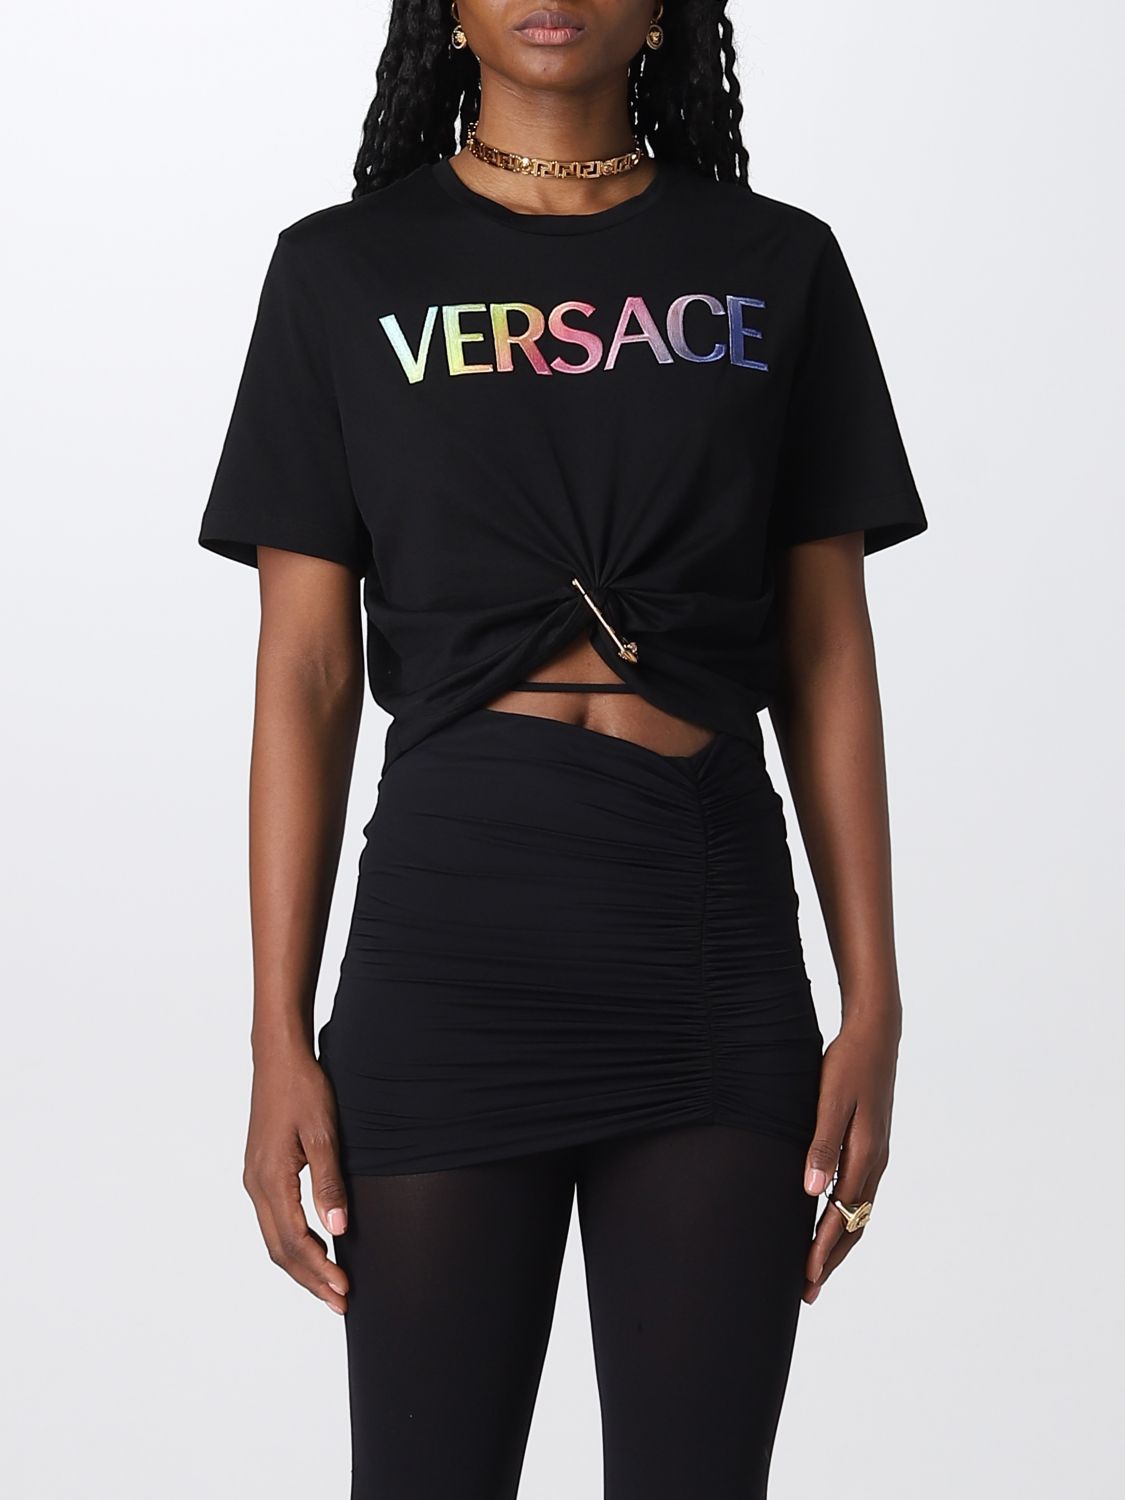 VERSACE: t-shirt for woman - Black | Versace t-shirt 10041621A04550 on GIGLIO.COM